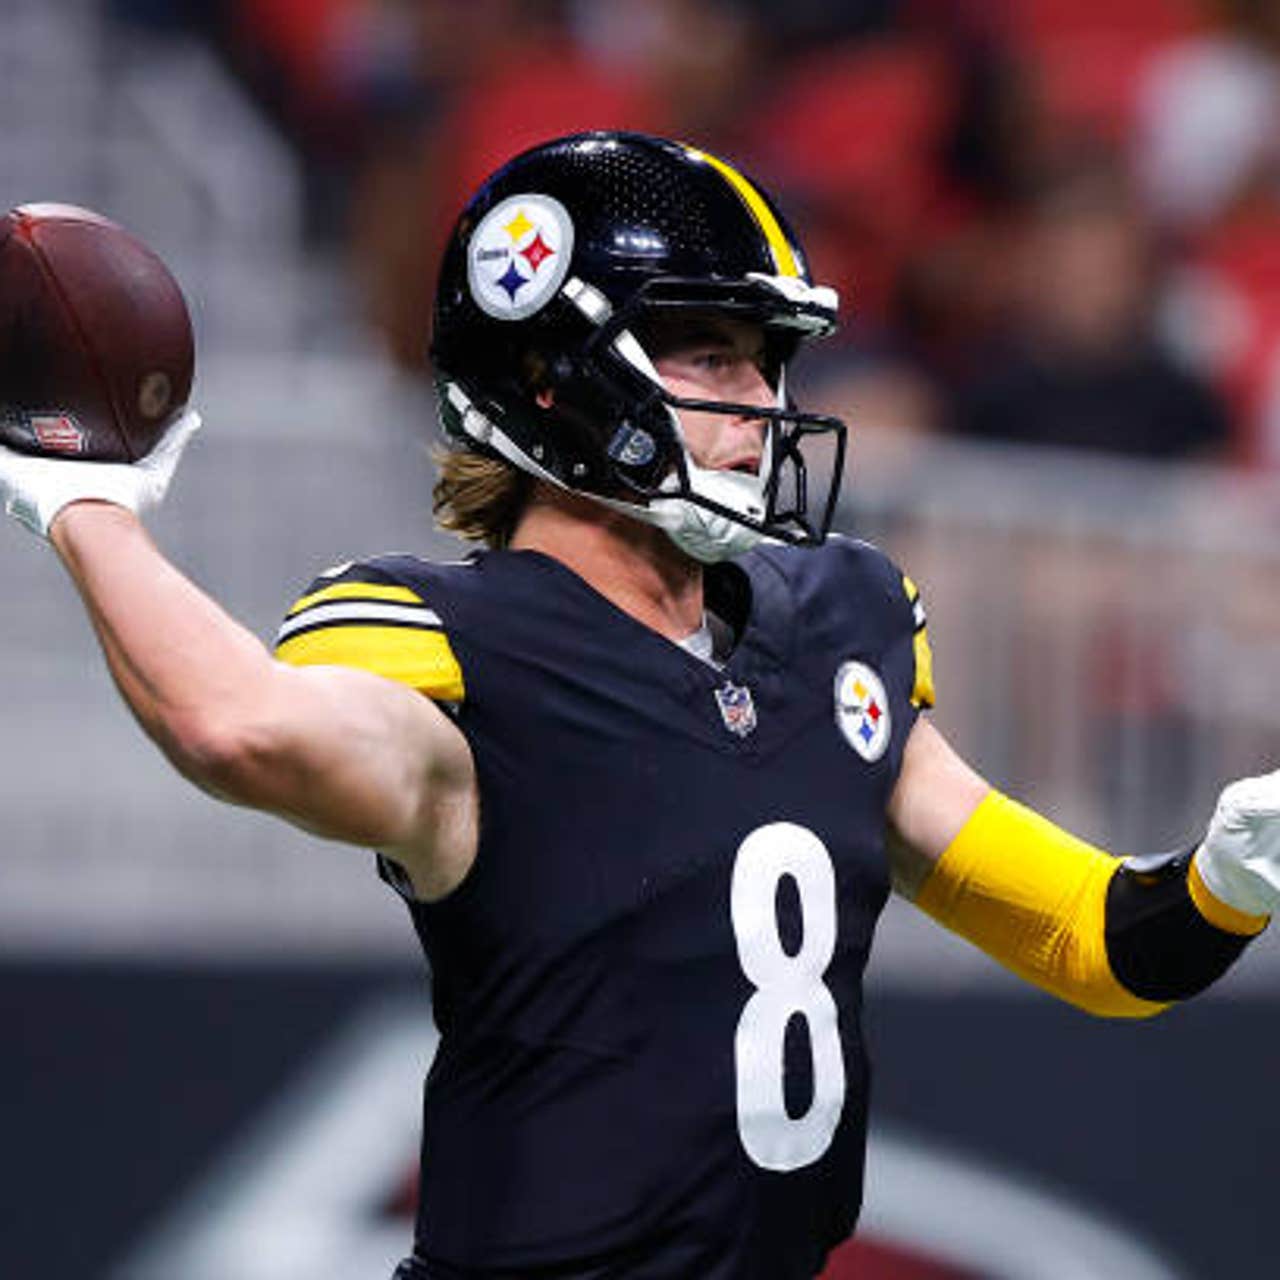 49ers vs. Steelers Livestream: How to Watch NFL Week 1 Online Today - CNET